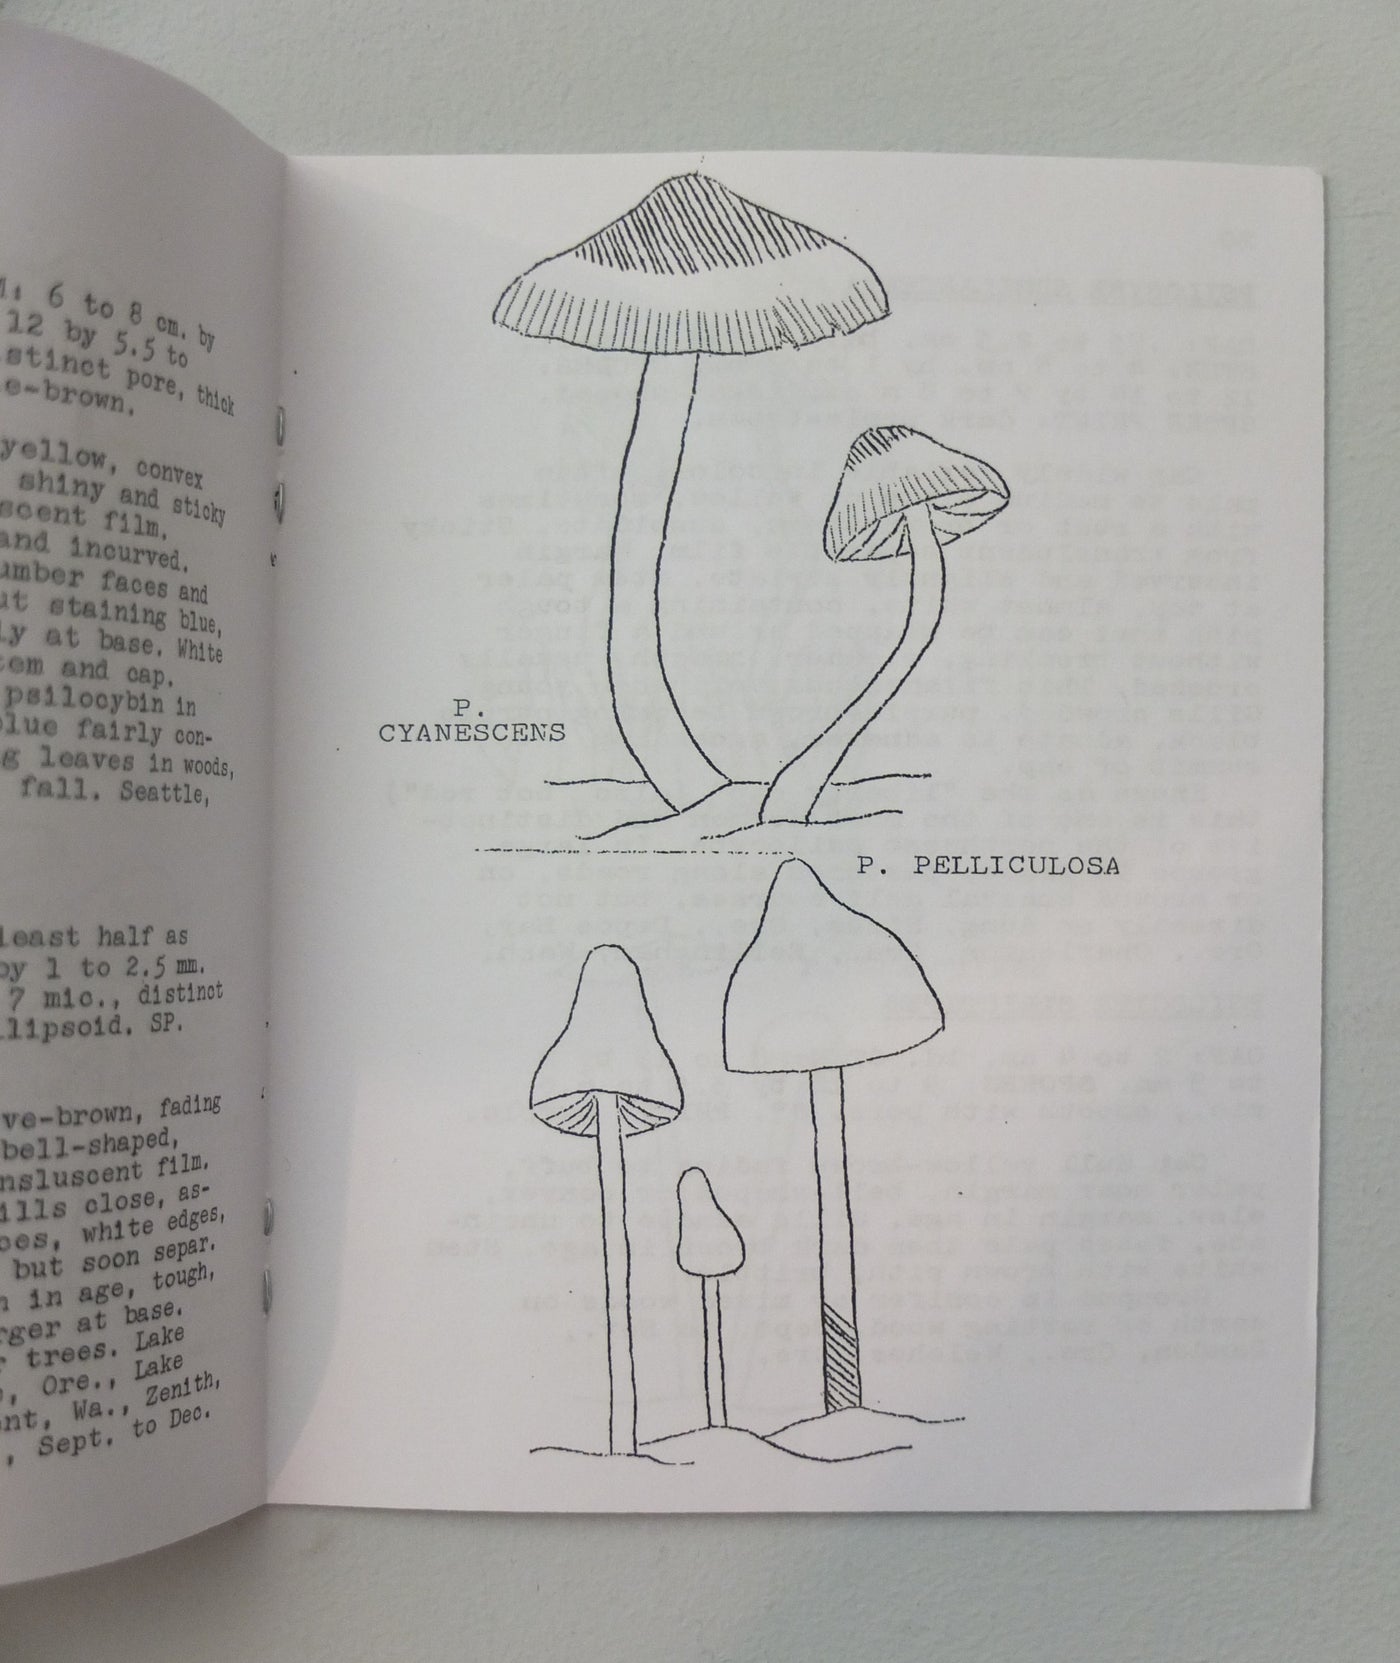 Magic Mushrooms: A Guide to 12 Hallucinogenic Species of the Pacific Northwest By Everett Kardell and Robyn Stitely}